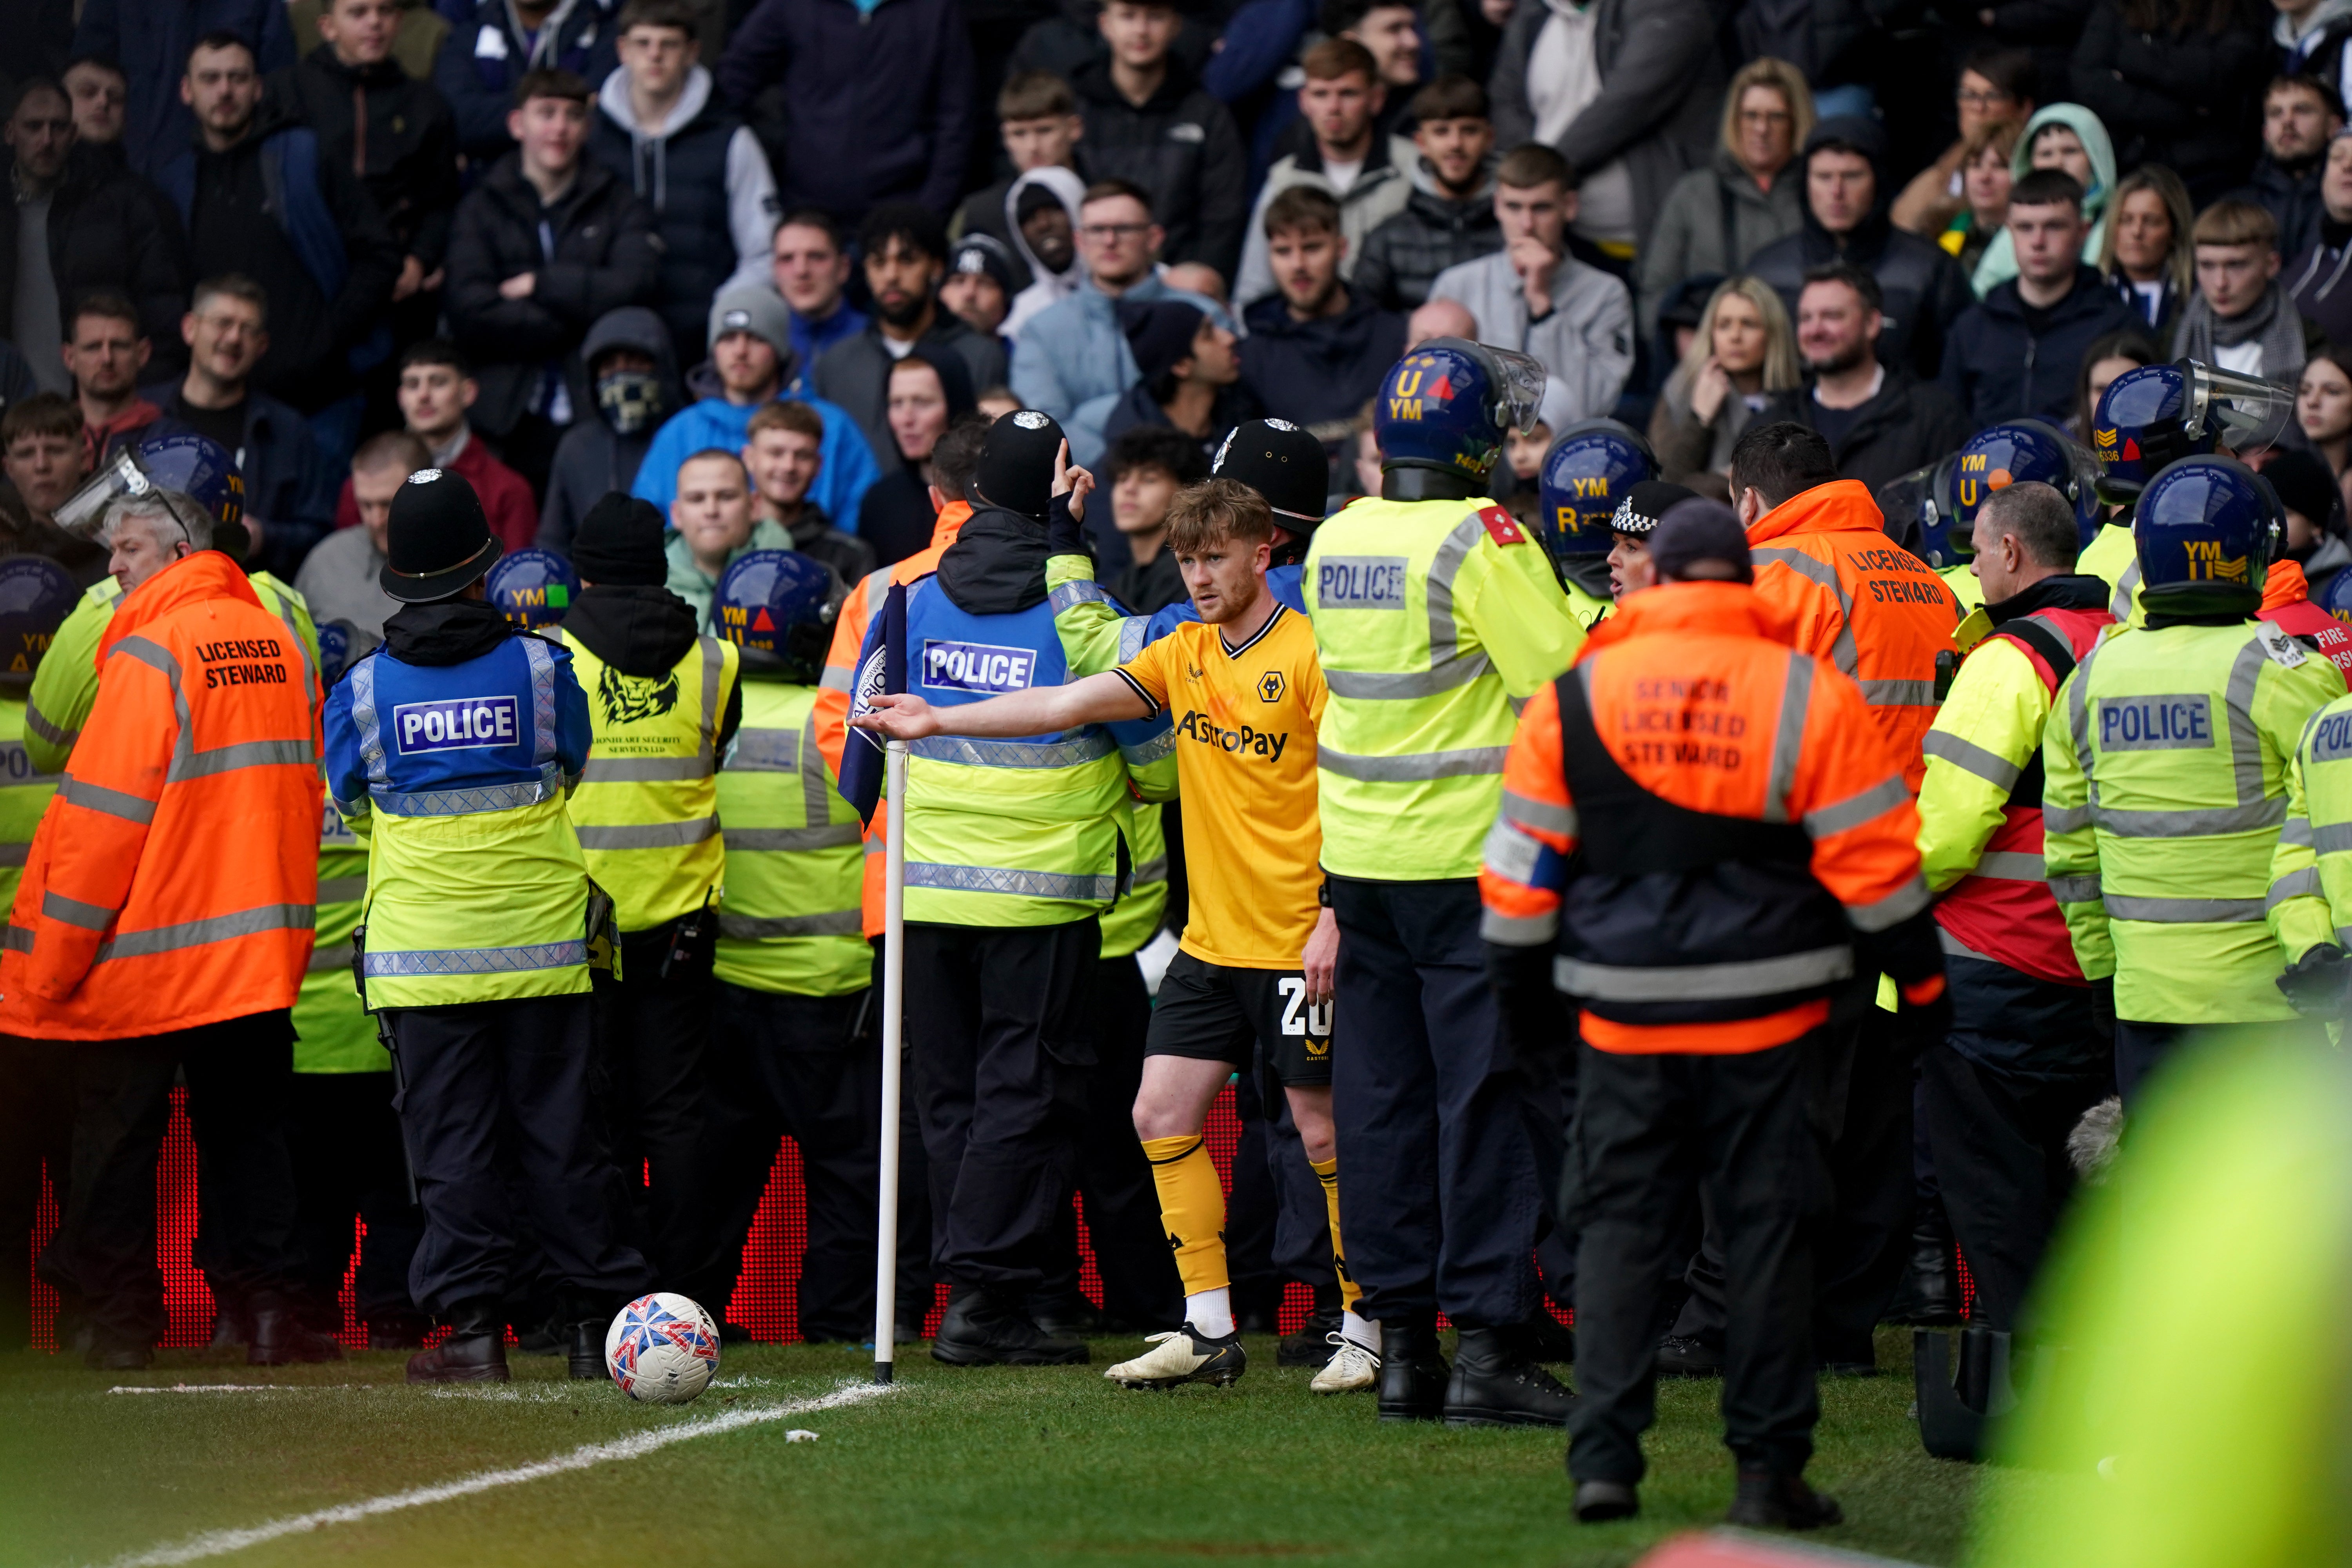 Wolves’ Tommy Doyle attempts to take a corner while surrounded by police officers and stewards during the Emirates FA Cup fourth-round match at the Hawthorns